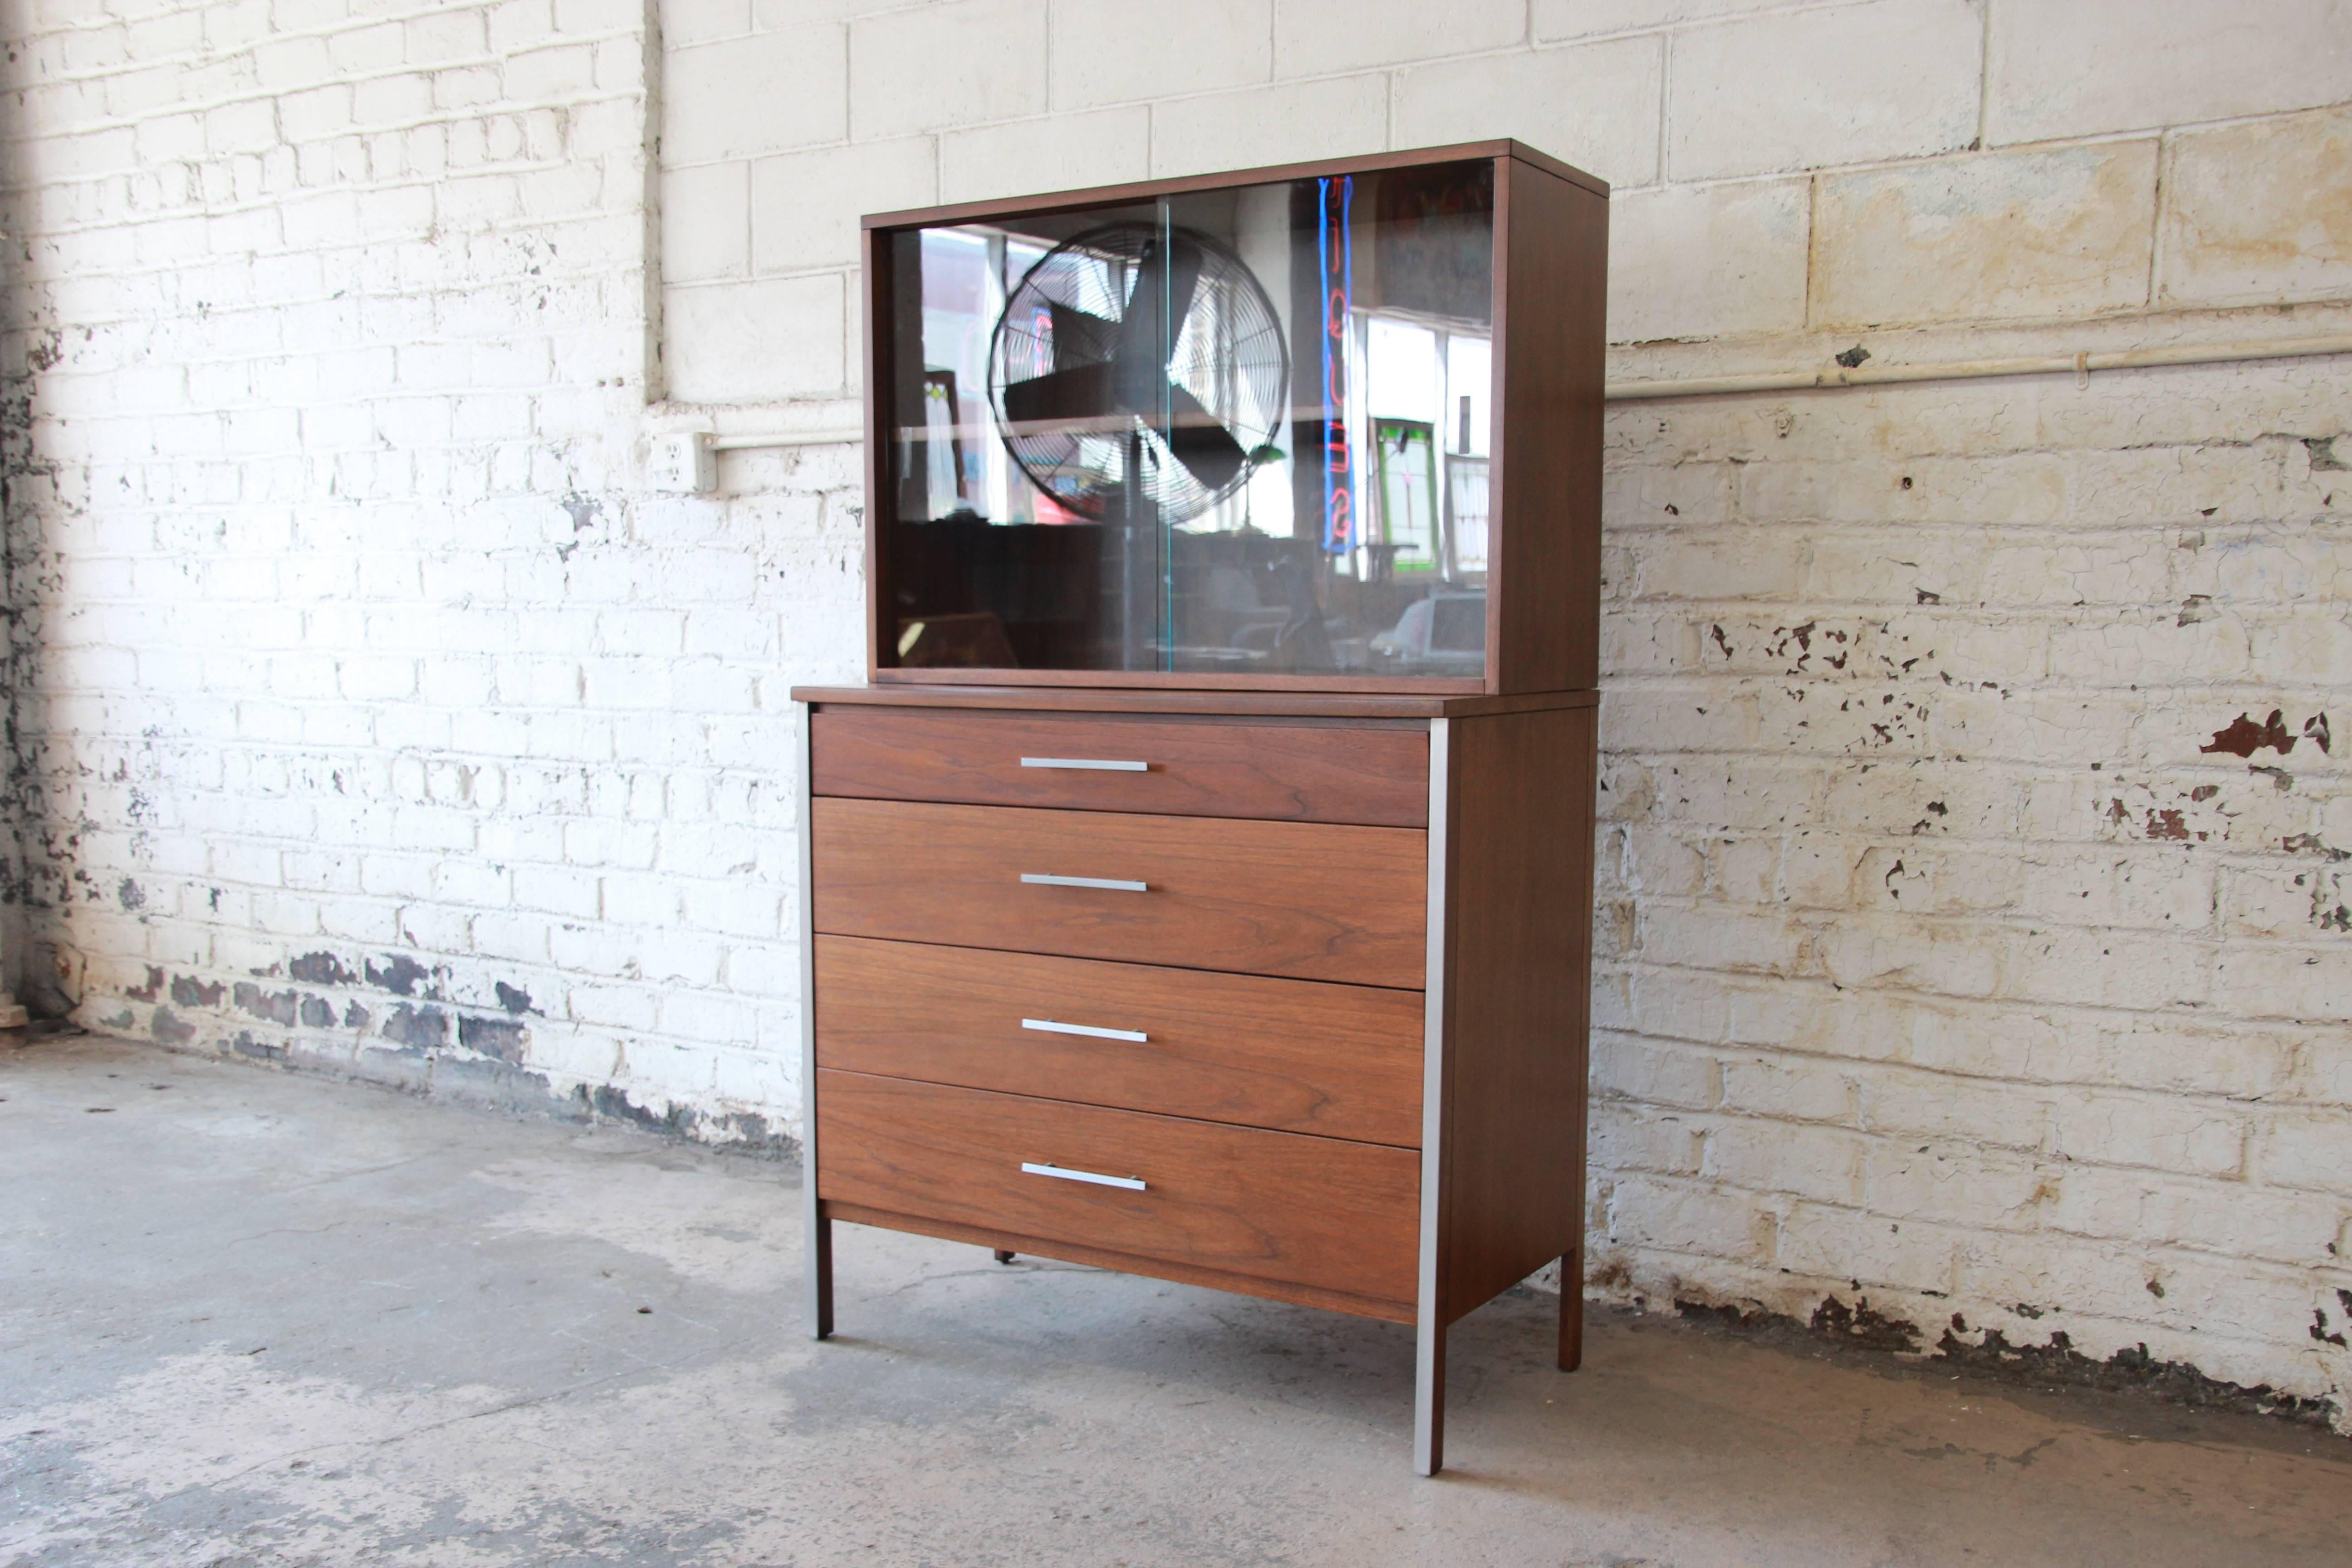 An exceptional Mid-Century Modern four-drawer walnut chest of drawers with glass front hutch top designed by Paul McCobb for Calvin Furniture. The chest features stunning walnut wood grain and sleek, Mid-Century design. The aluminum trim and drawer